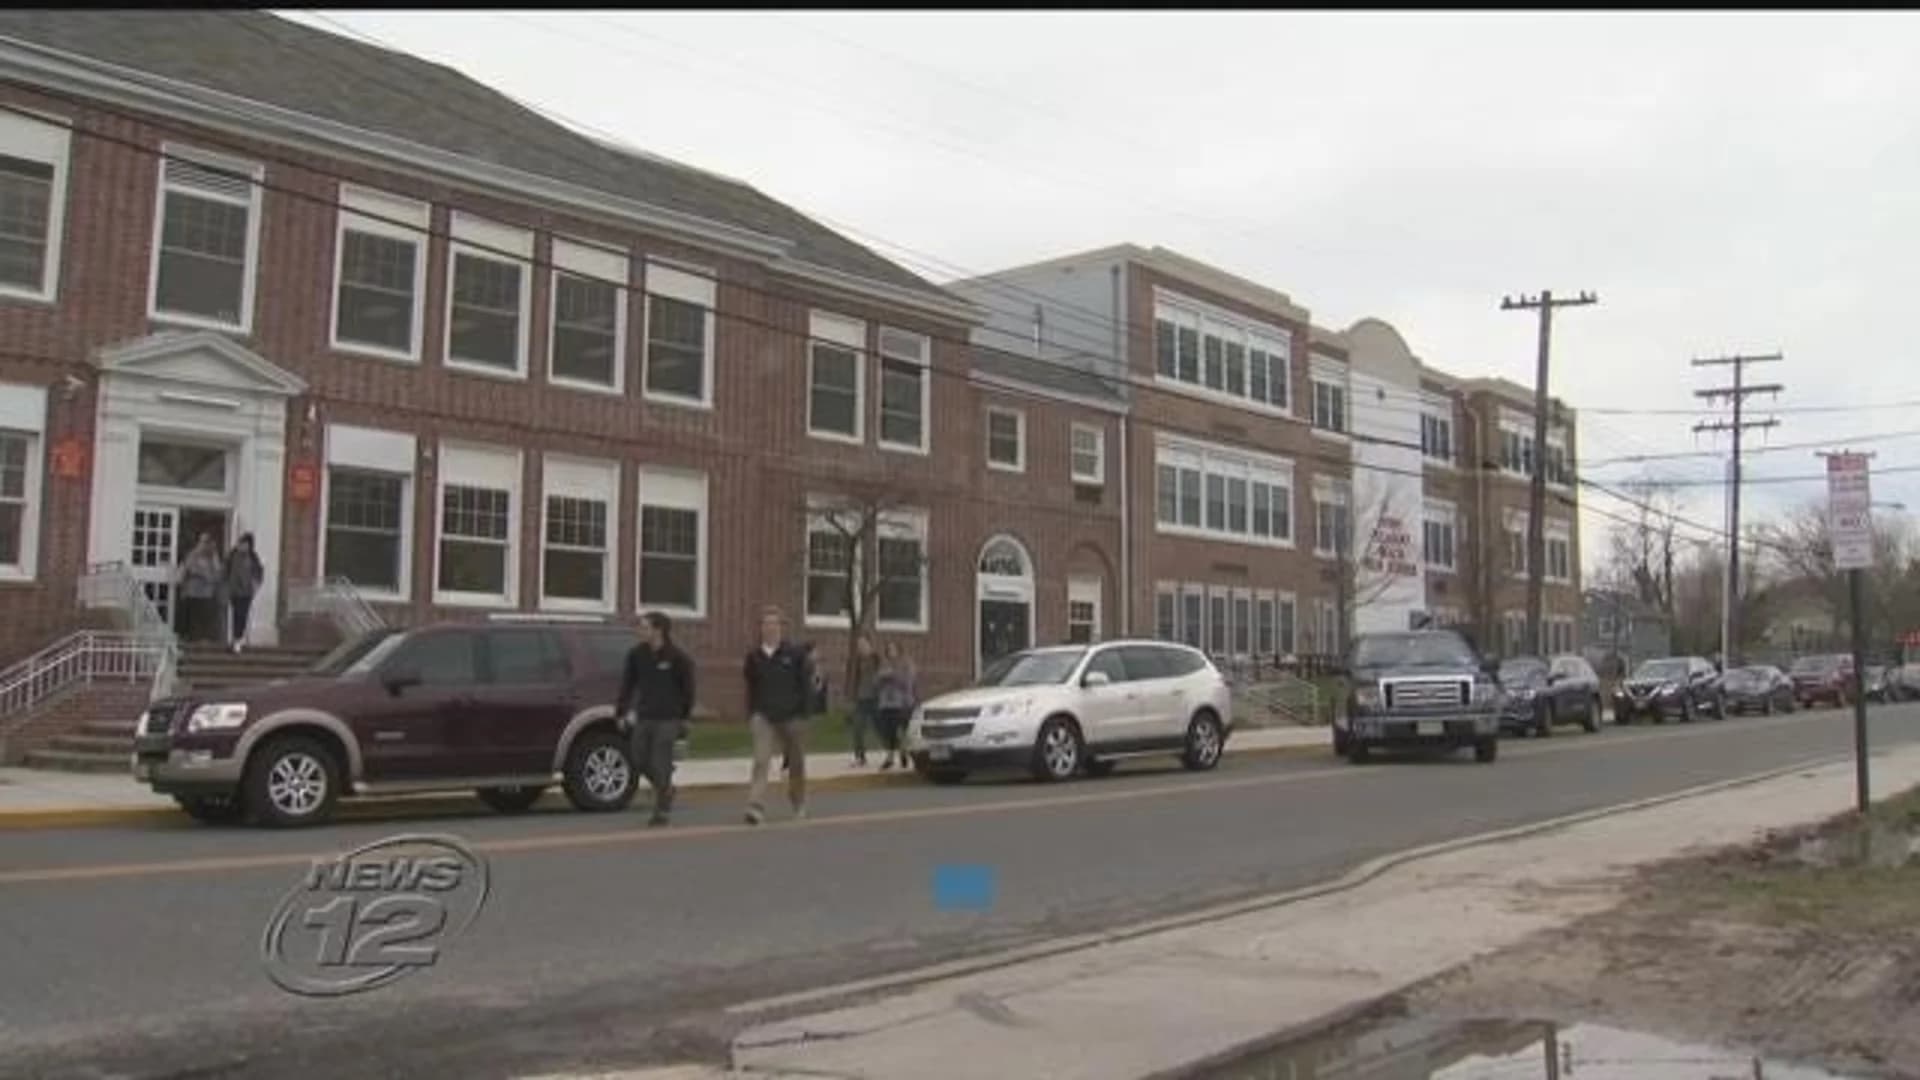 Security increased at schools across New Jersey following threats